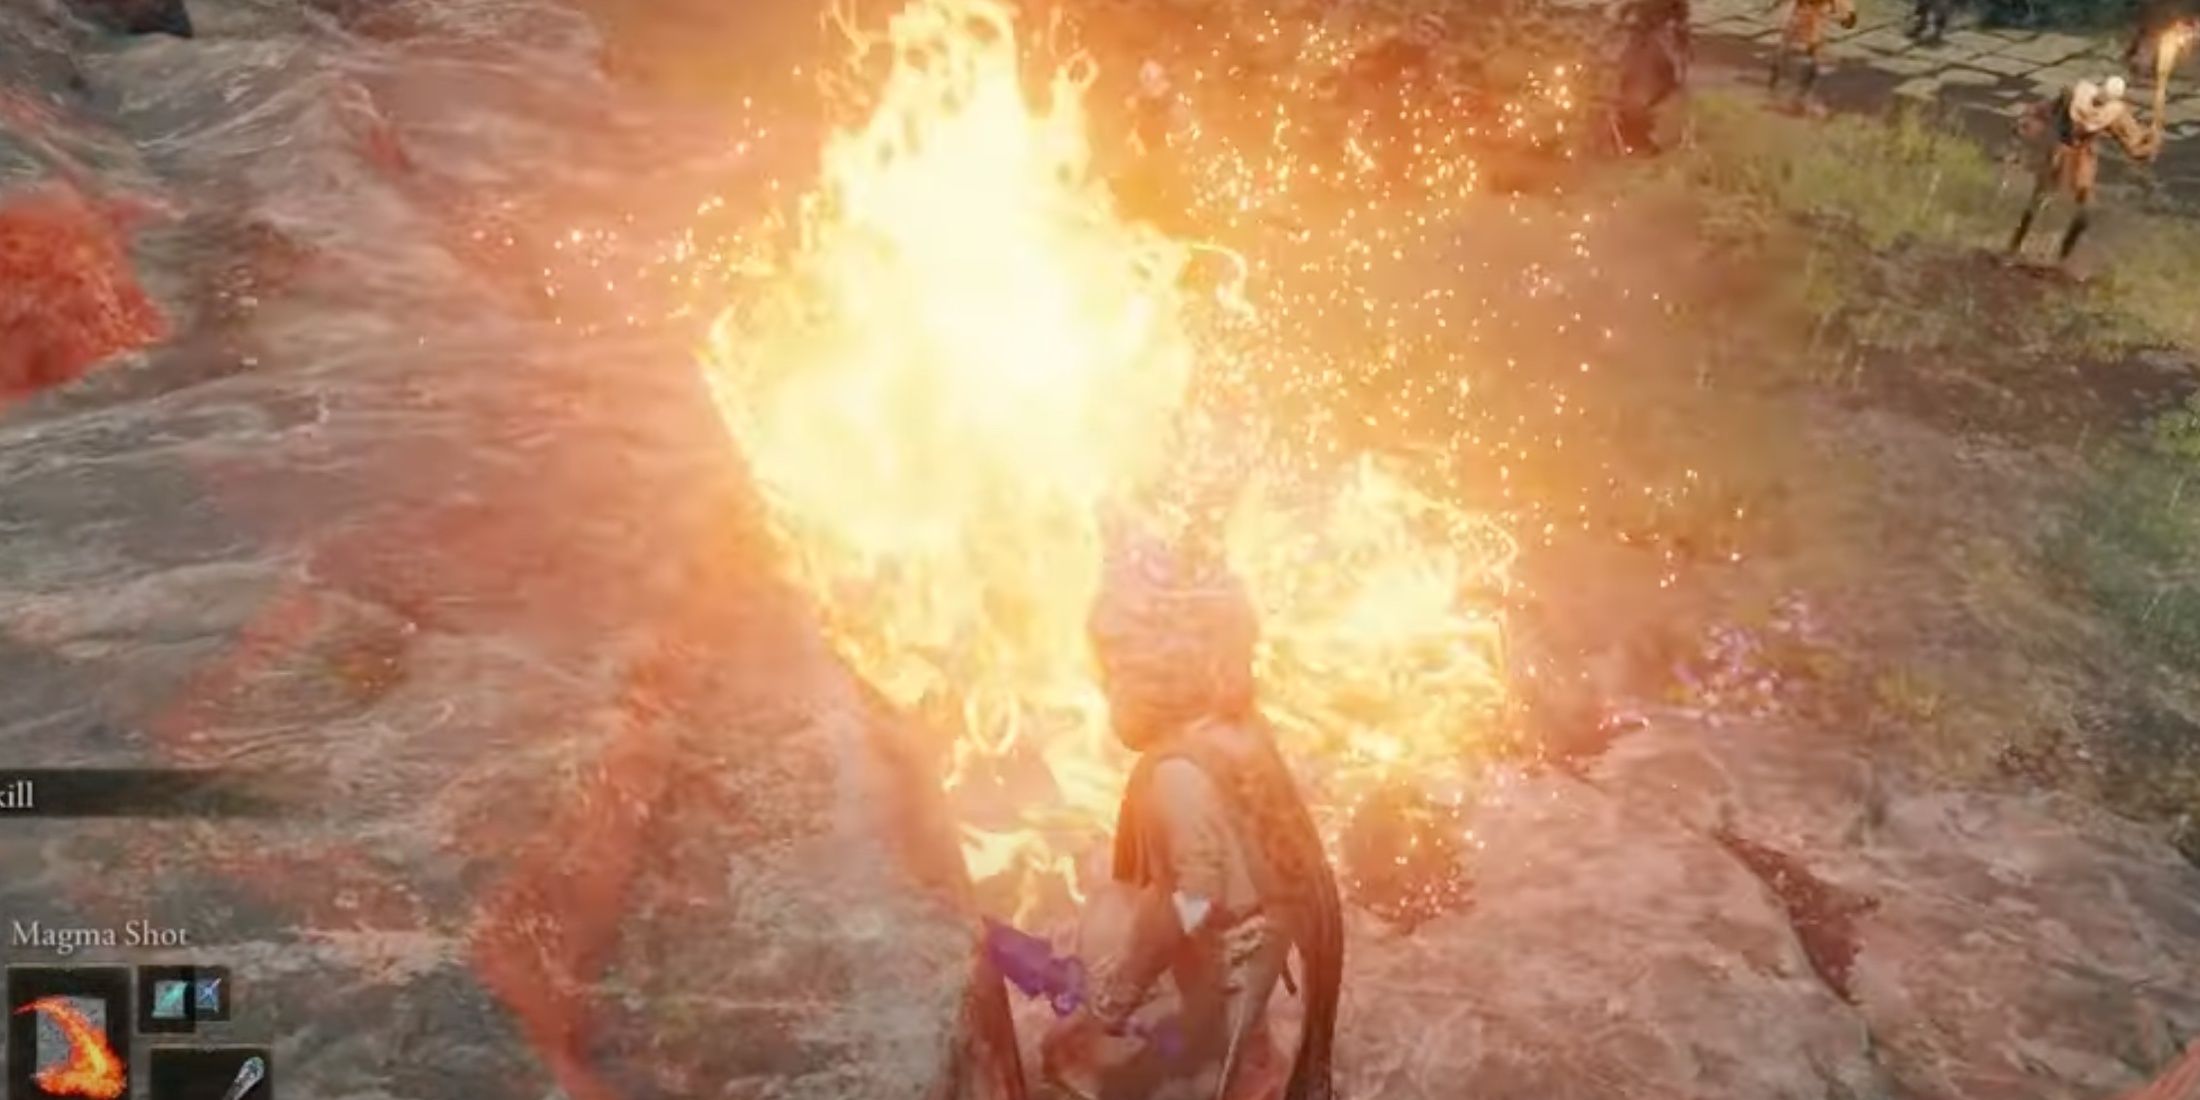 The Tarnished unleashes a Magma Shot in Elden Ring.